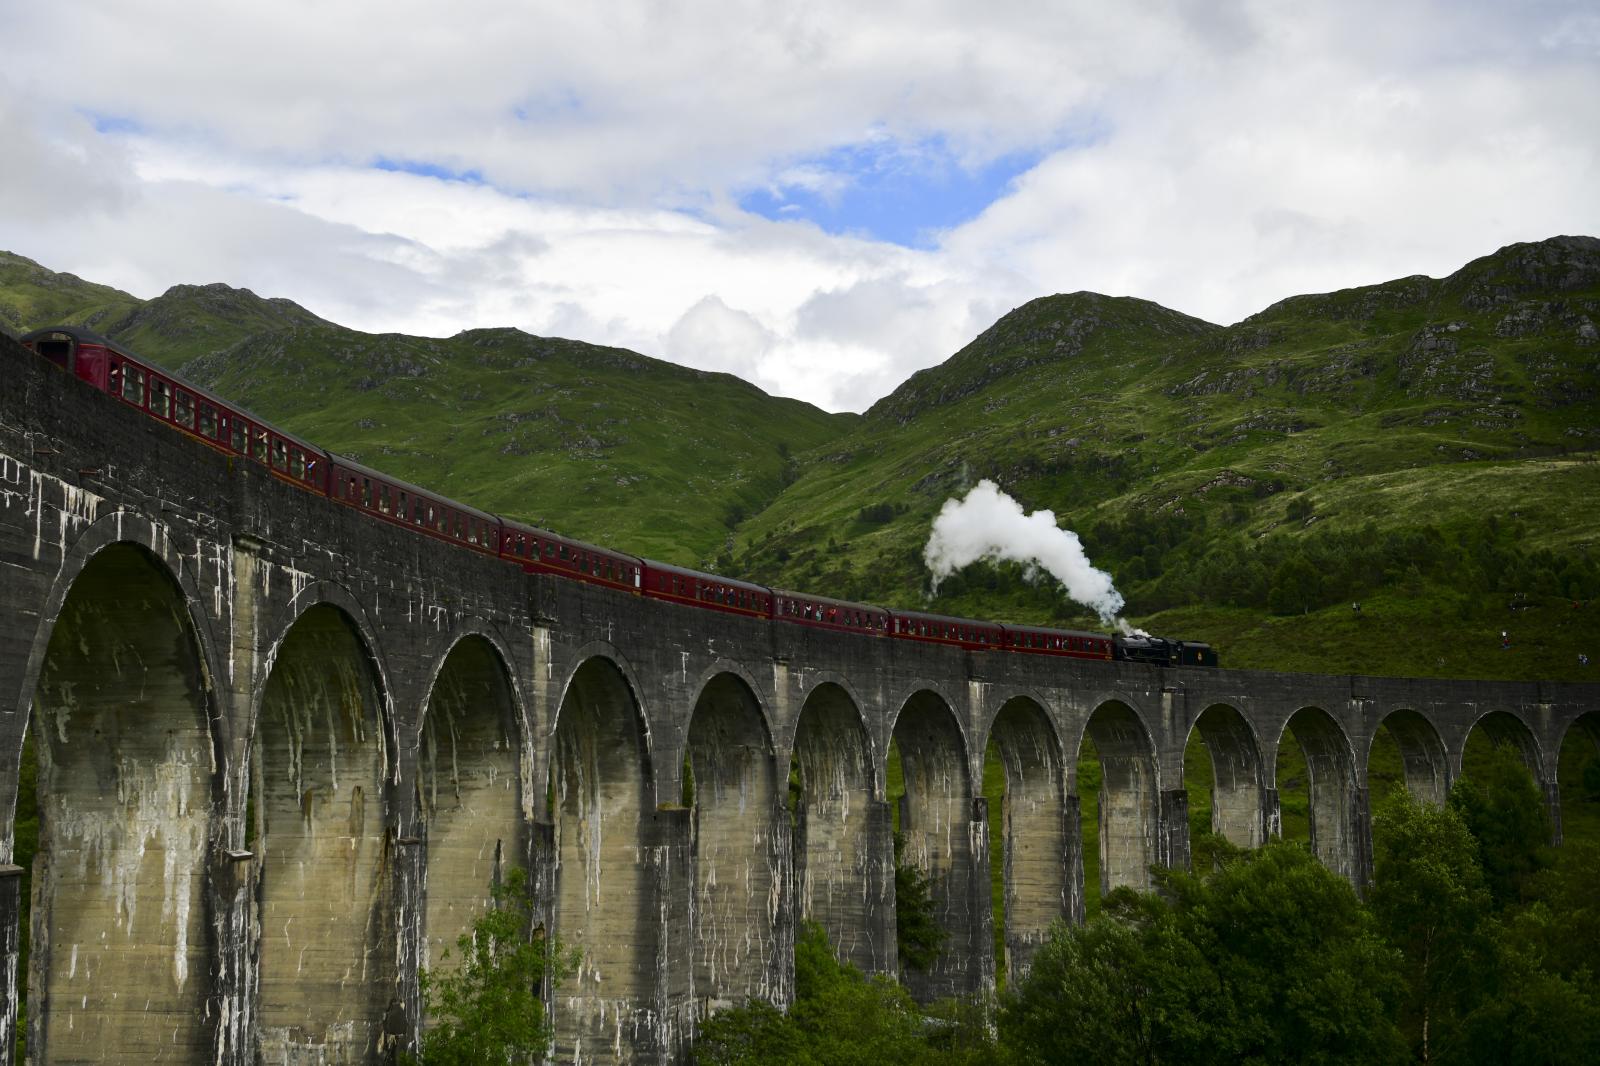 Image from Daily Life UK - Jacobite steam train - The route runs for a stretch of 41...